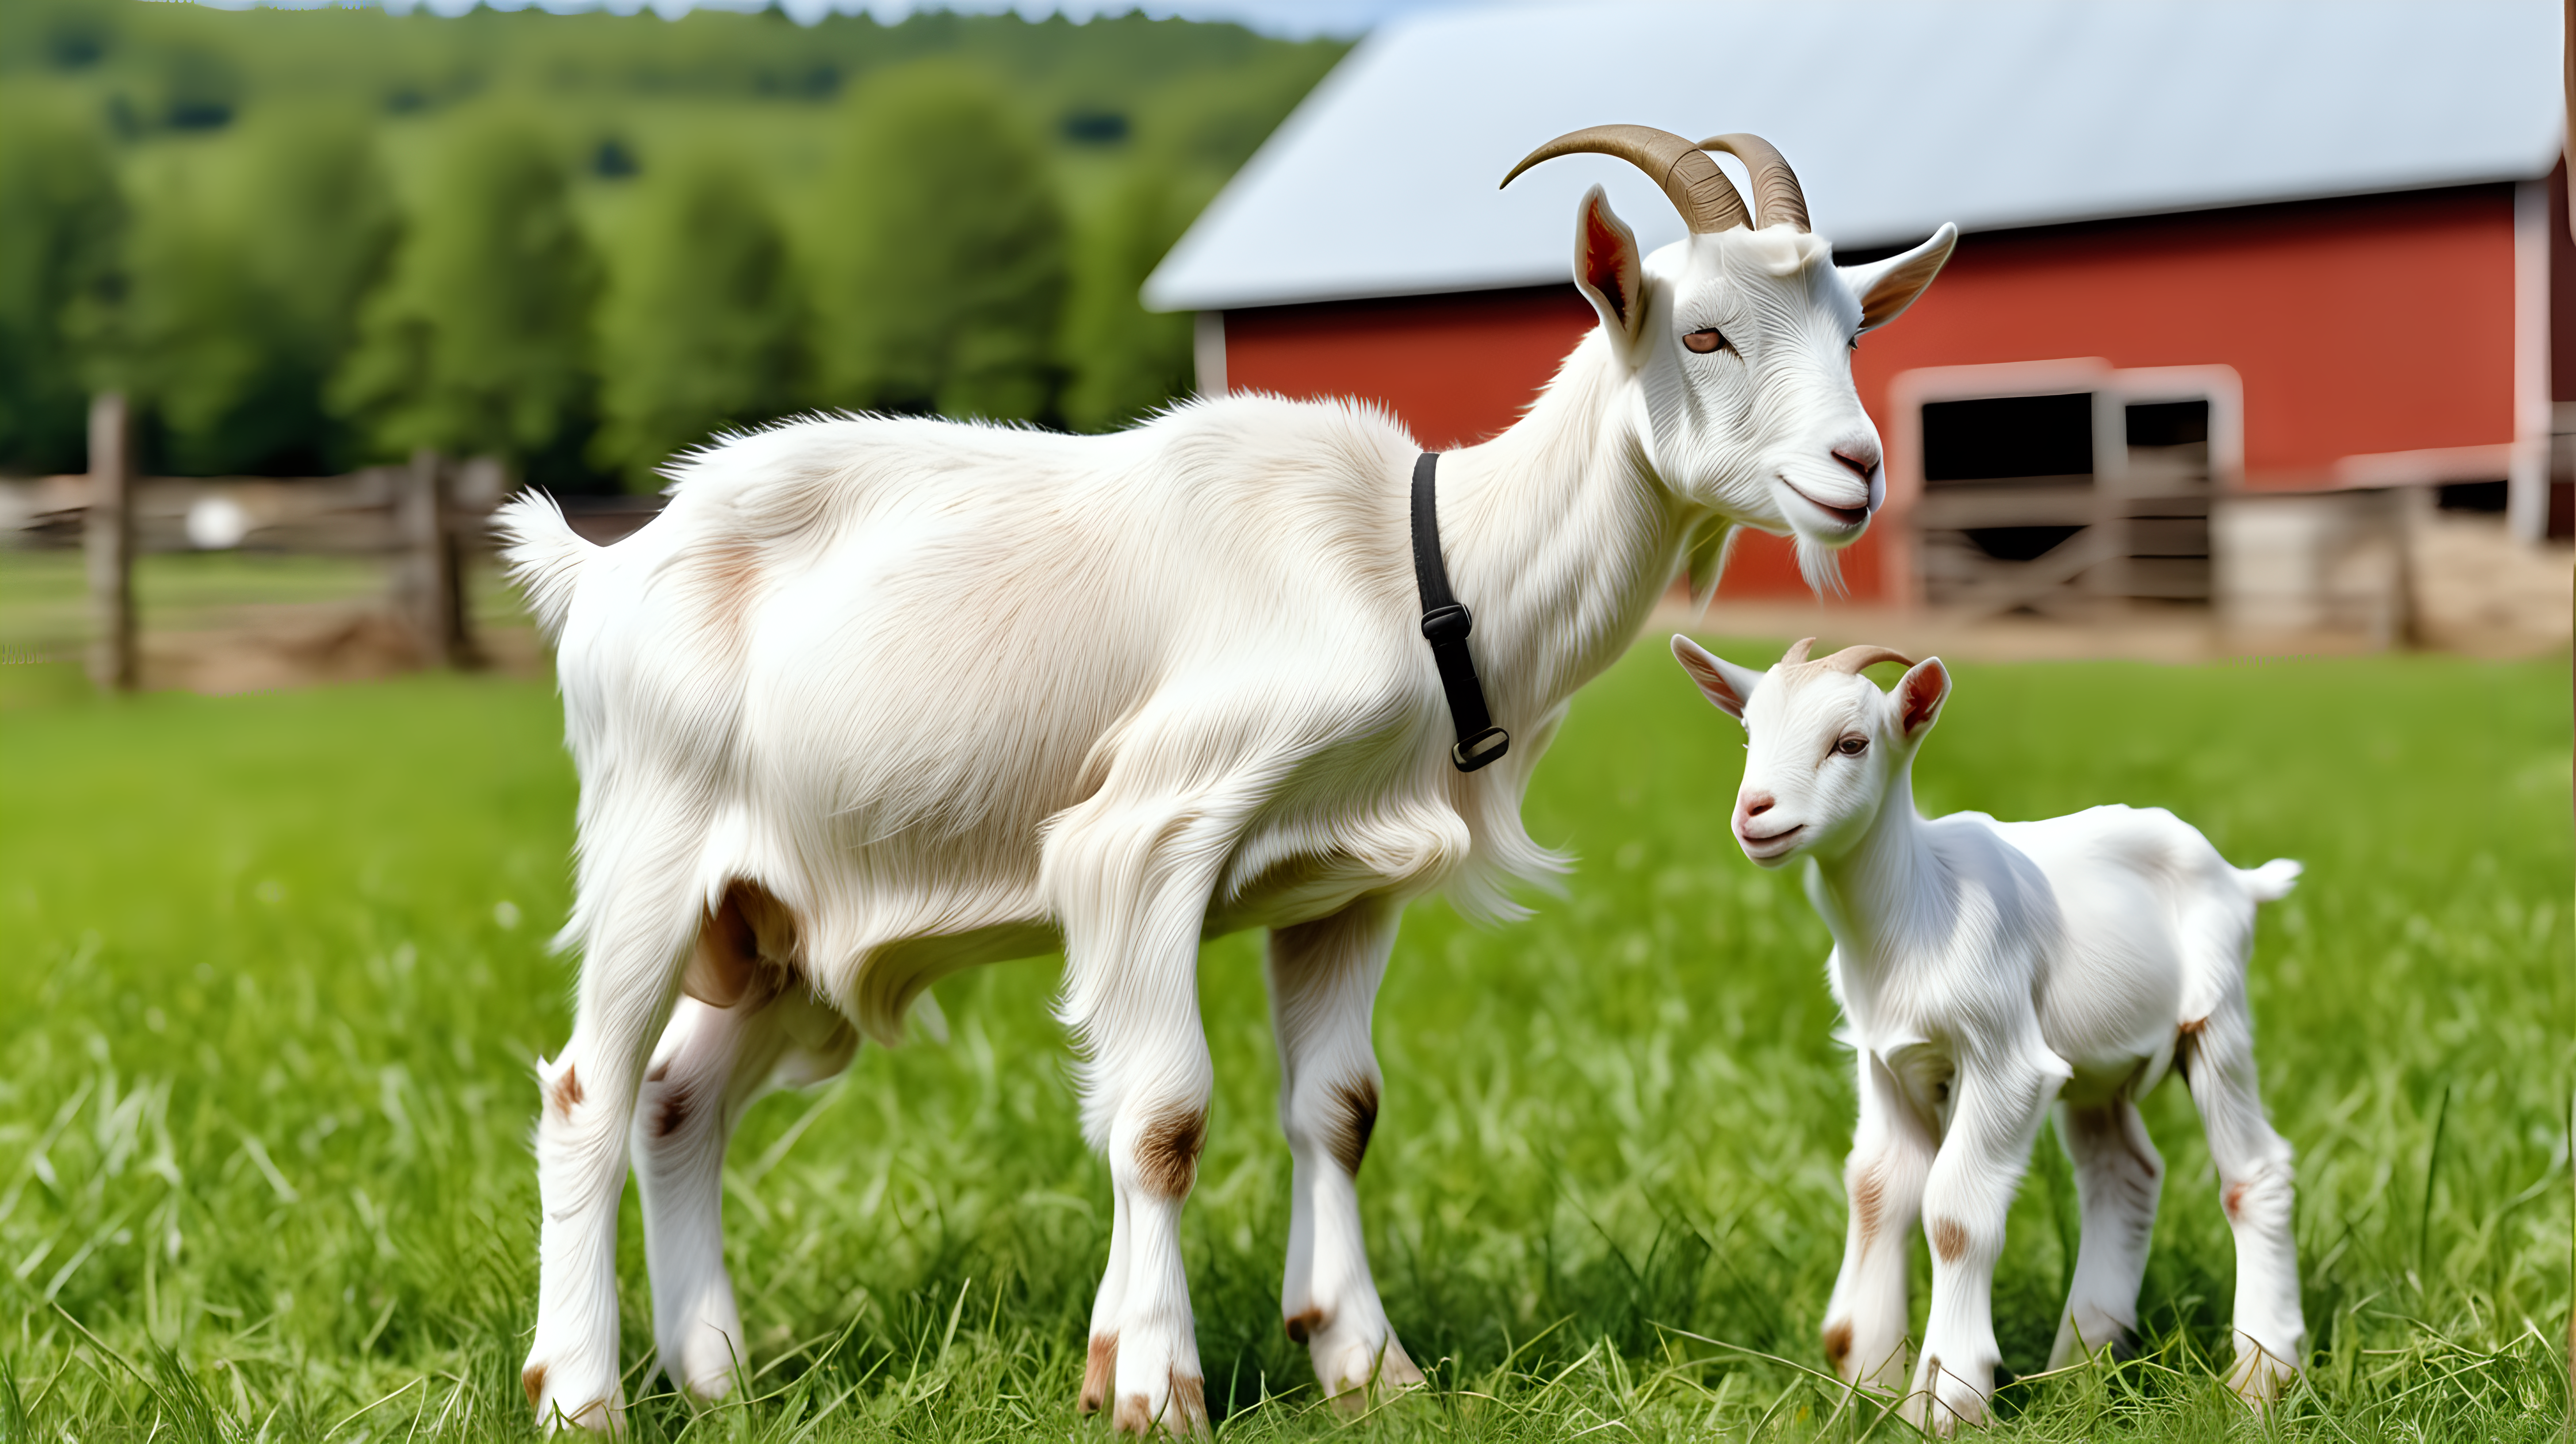 Goat kid with Goat in field, farm barn background, isolated on background